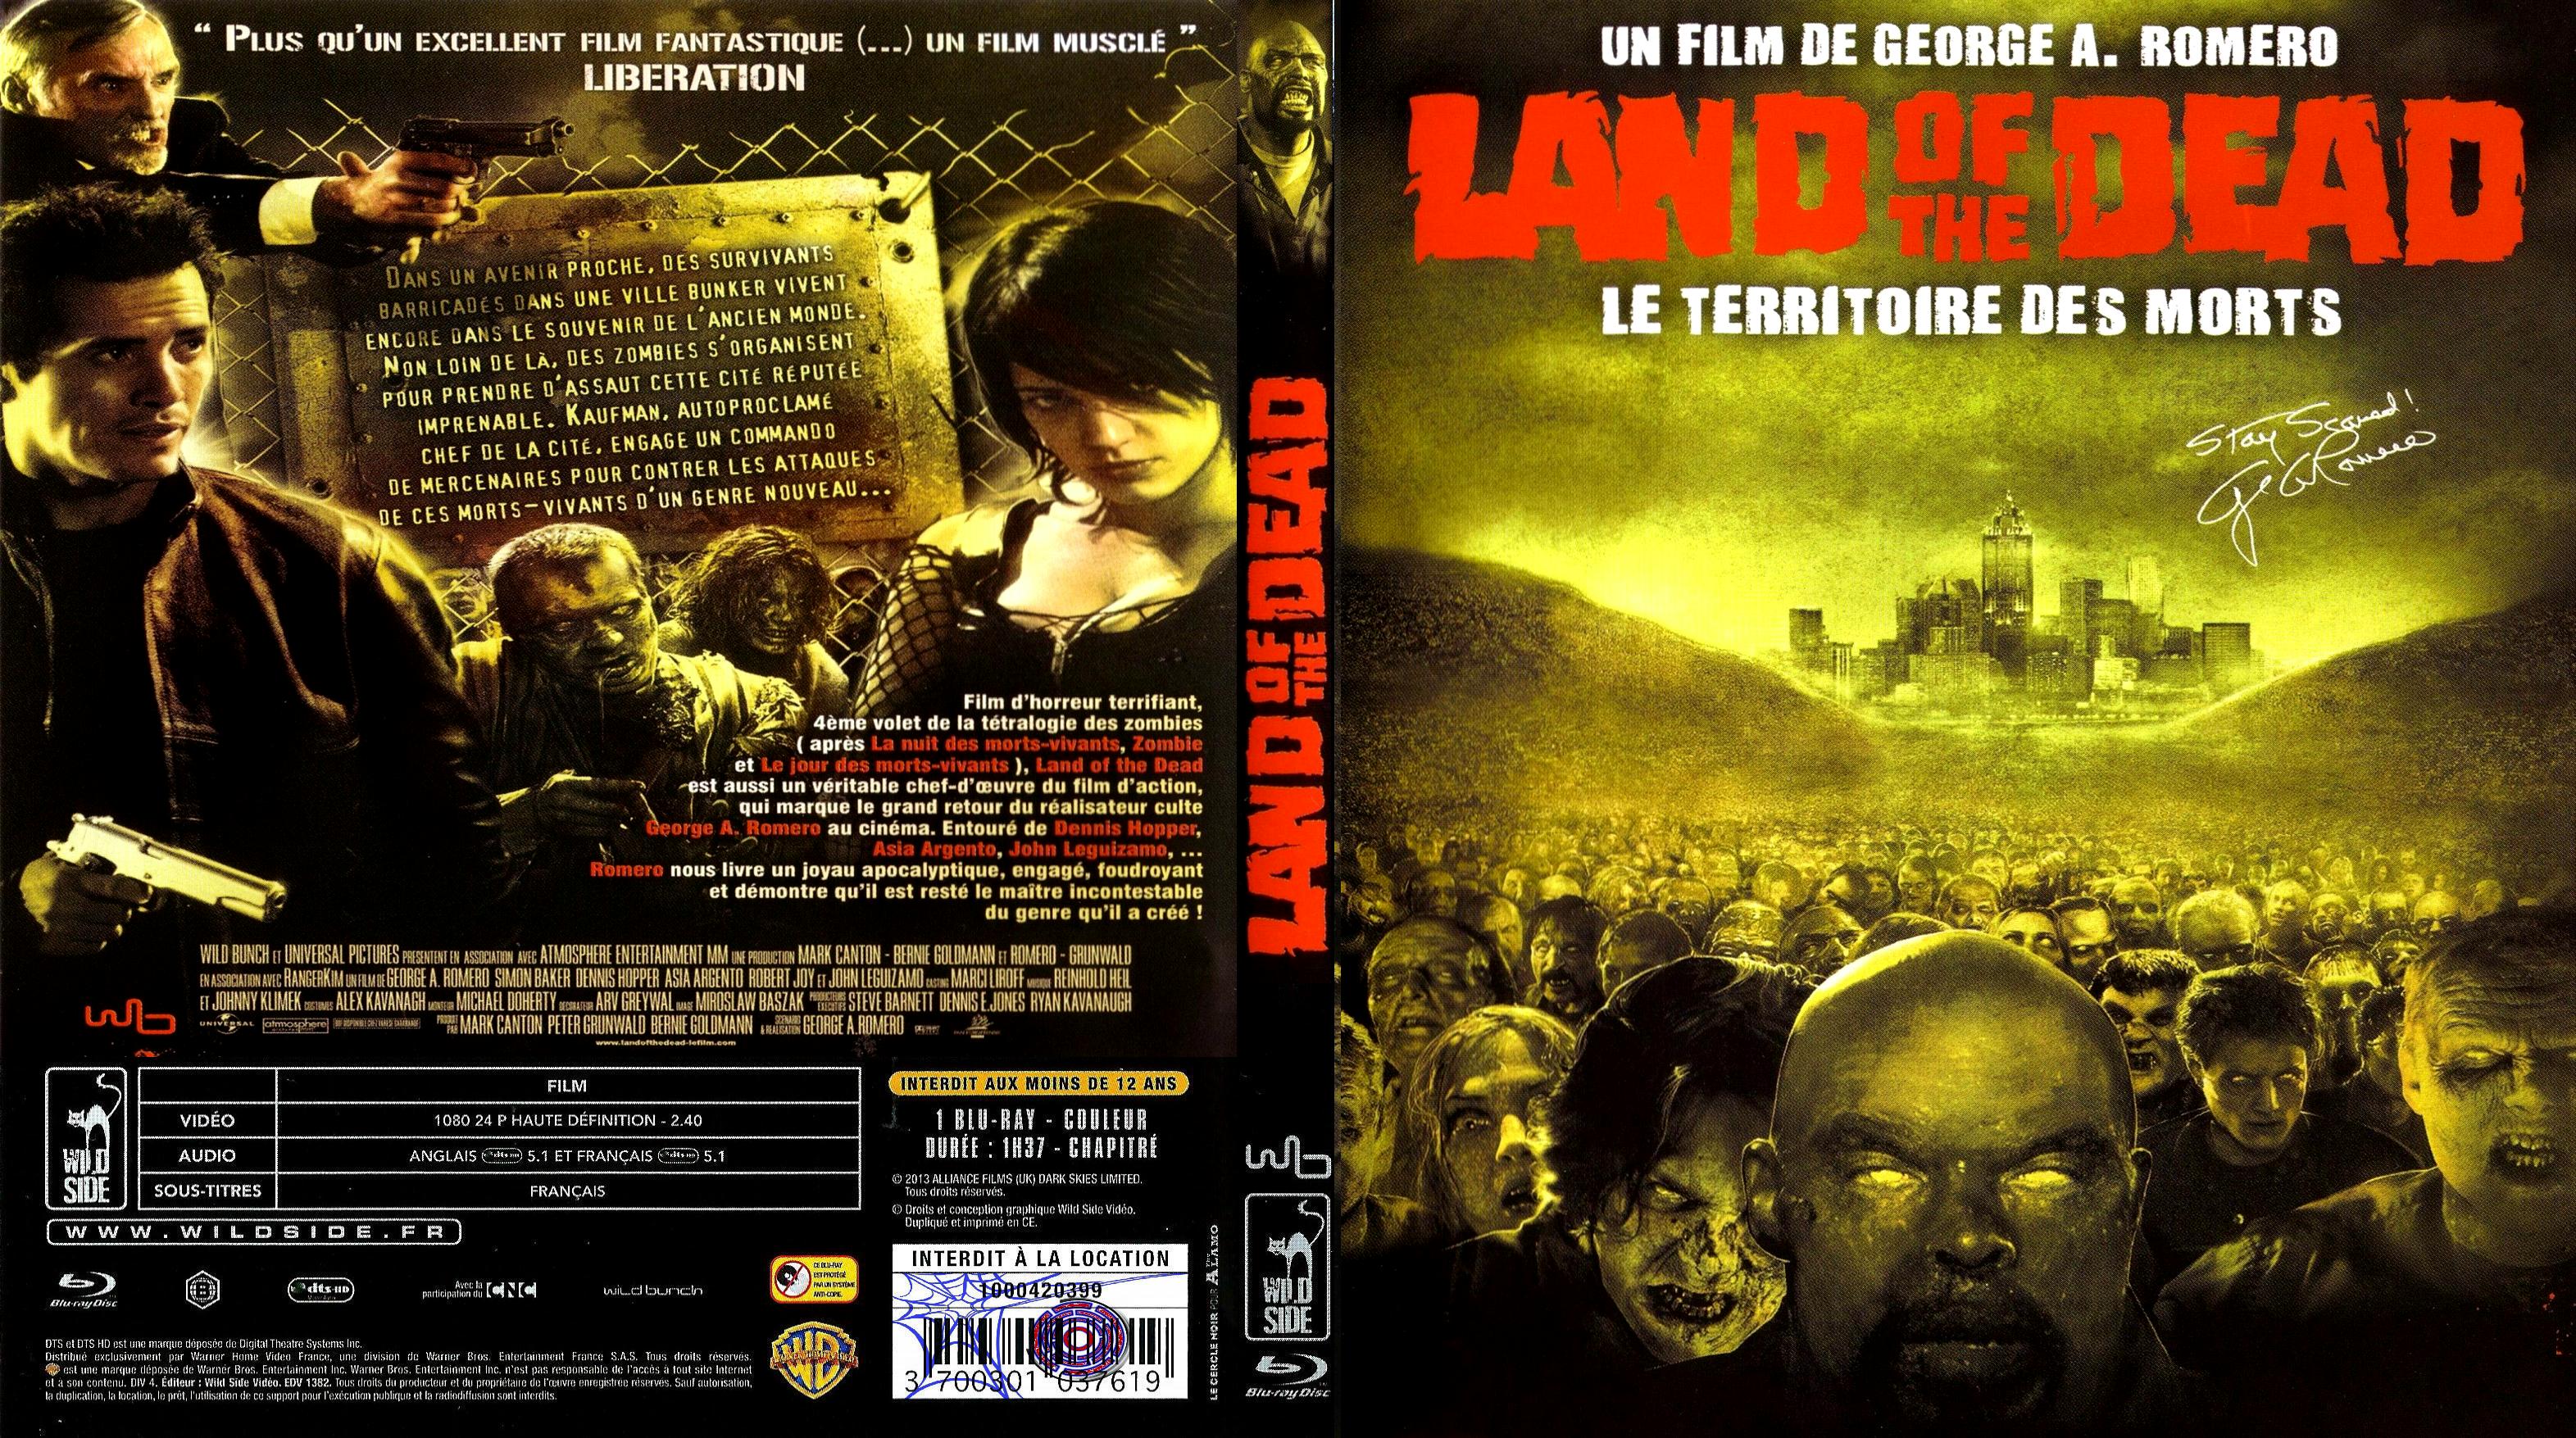 Jaquette DVD Land of the dead (BLU-RAY)